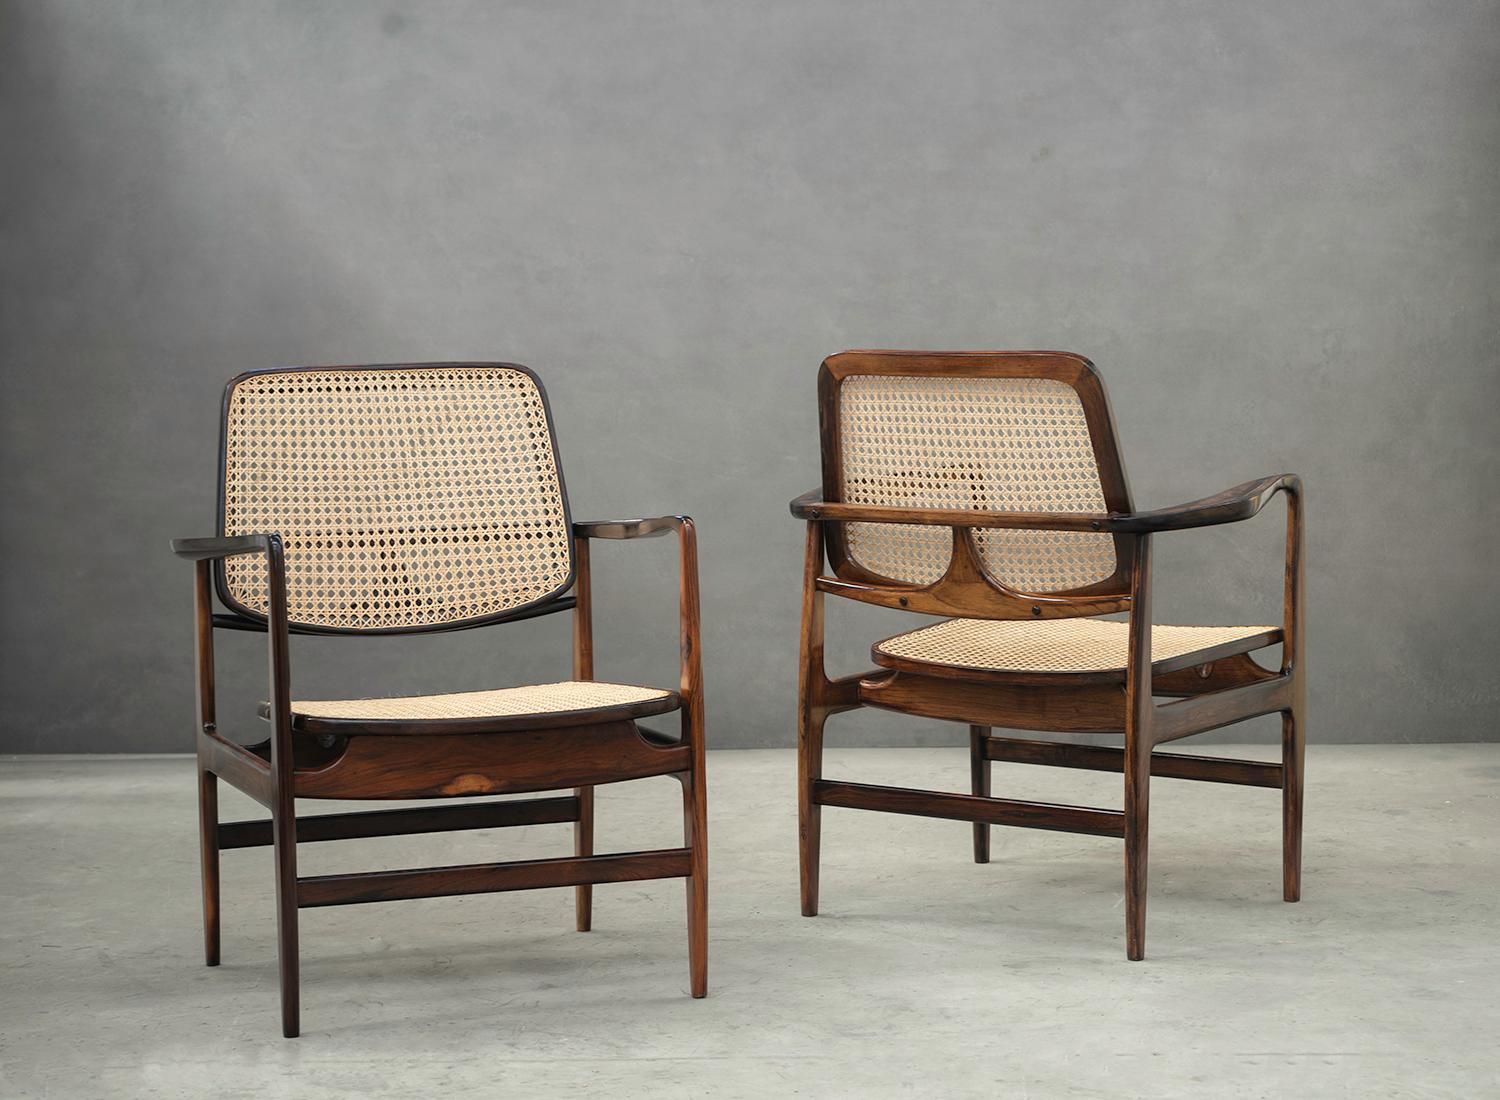 Designed in 1956 by Sergio Rodrigues, this modern pair of armchairs are made of solid rosewood and straw.

Created by Sergio Rodrigues in 1956, initially for the Jockey Club of Rio de Janeiro, the 